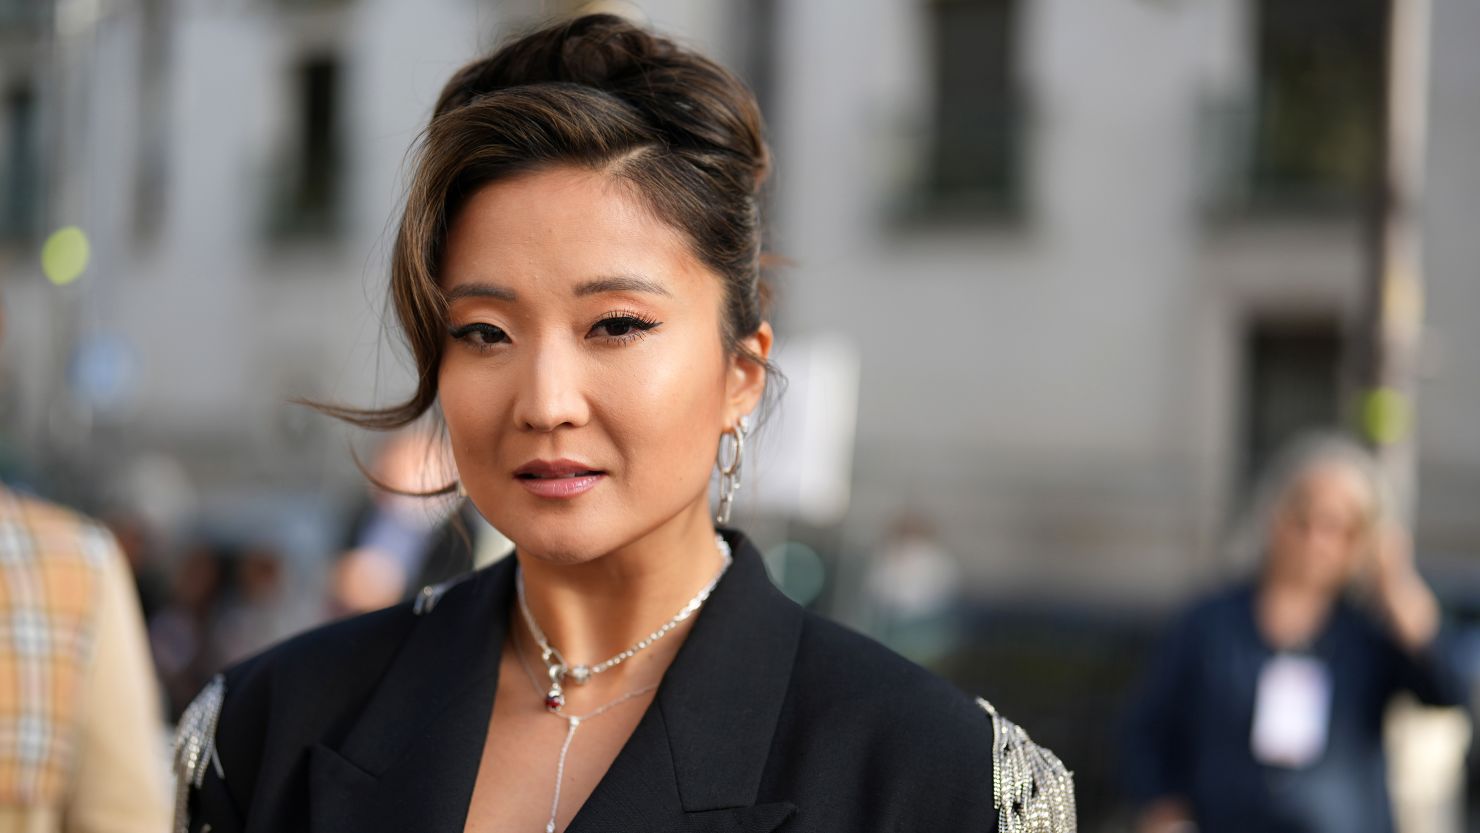 'Emily in Paris' star Ashley Park is recovering after going into serious septic shock